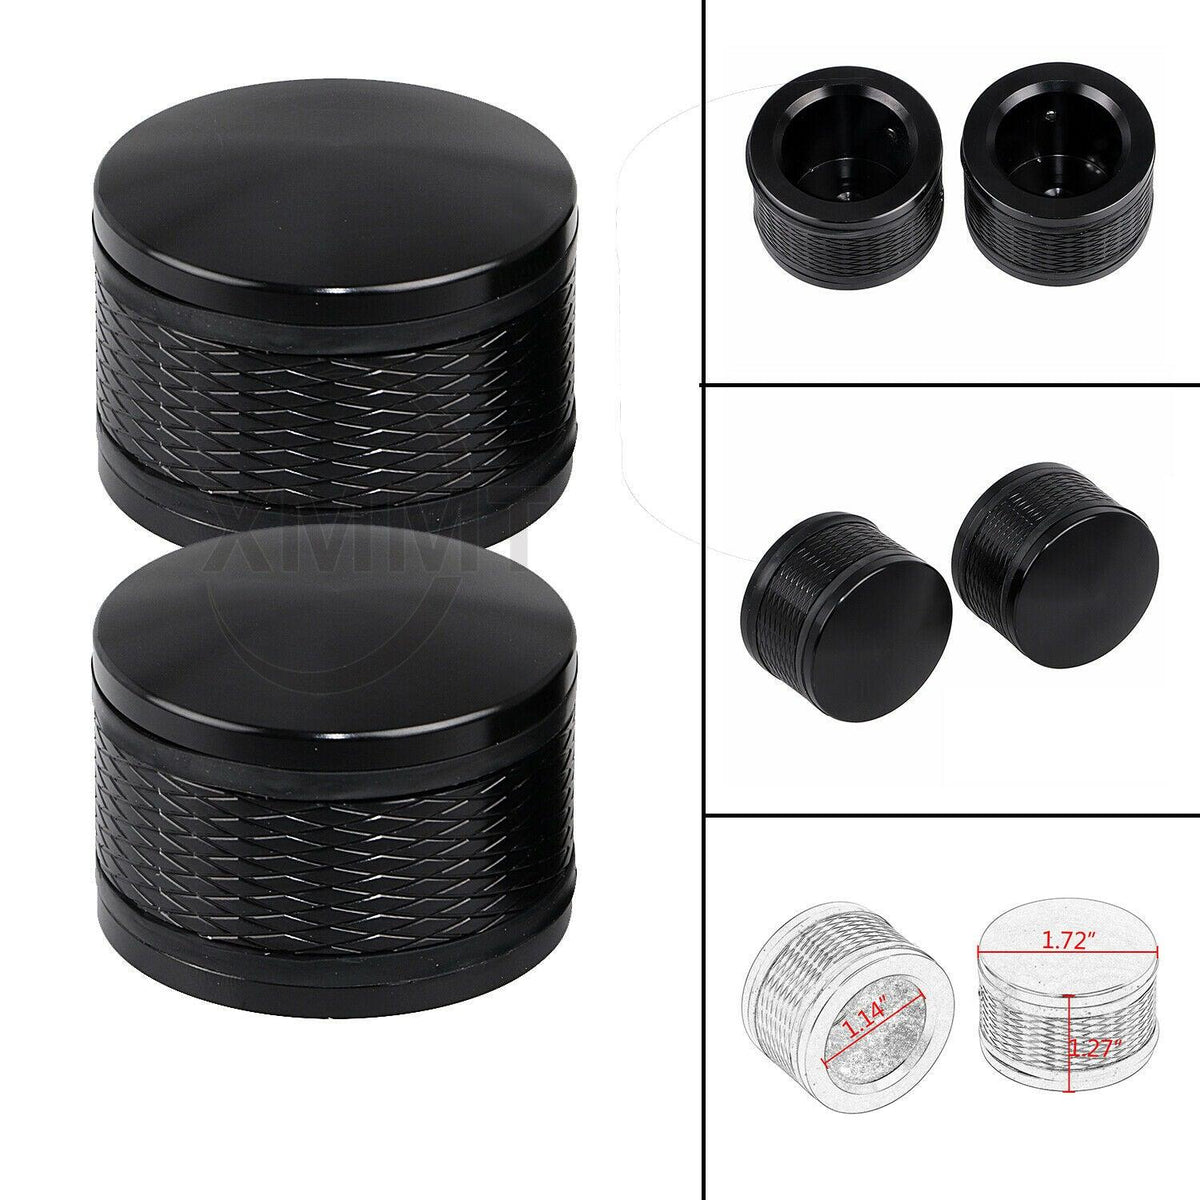 ClipsOne Black Front Axle Nut Cover Caps Compatible for Harley Davidson Dyna Softail Touring Road King Electra Street Glide 2008-2020 